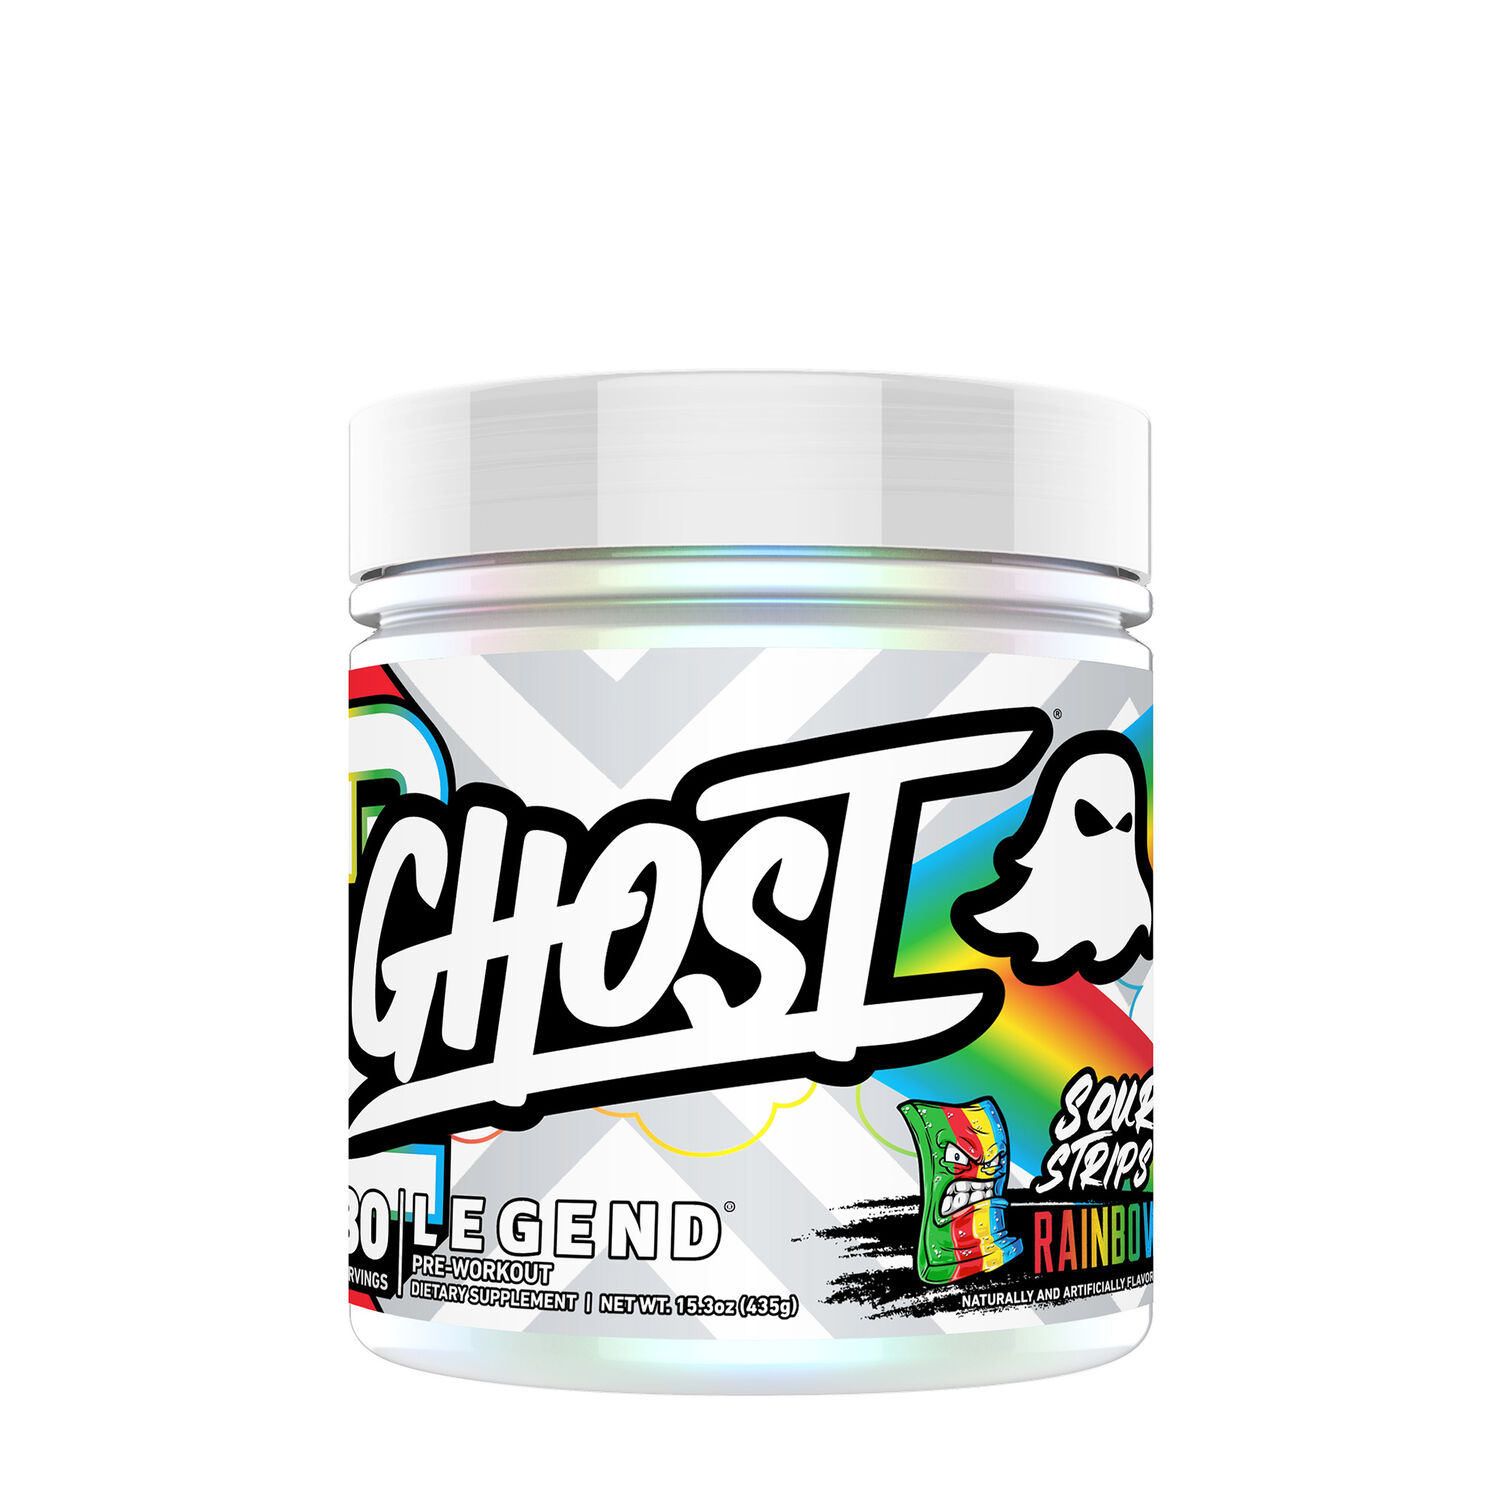 Ghost Legend V3 Pre-Workout - Sour Strips Rainbow - 30 Servings